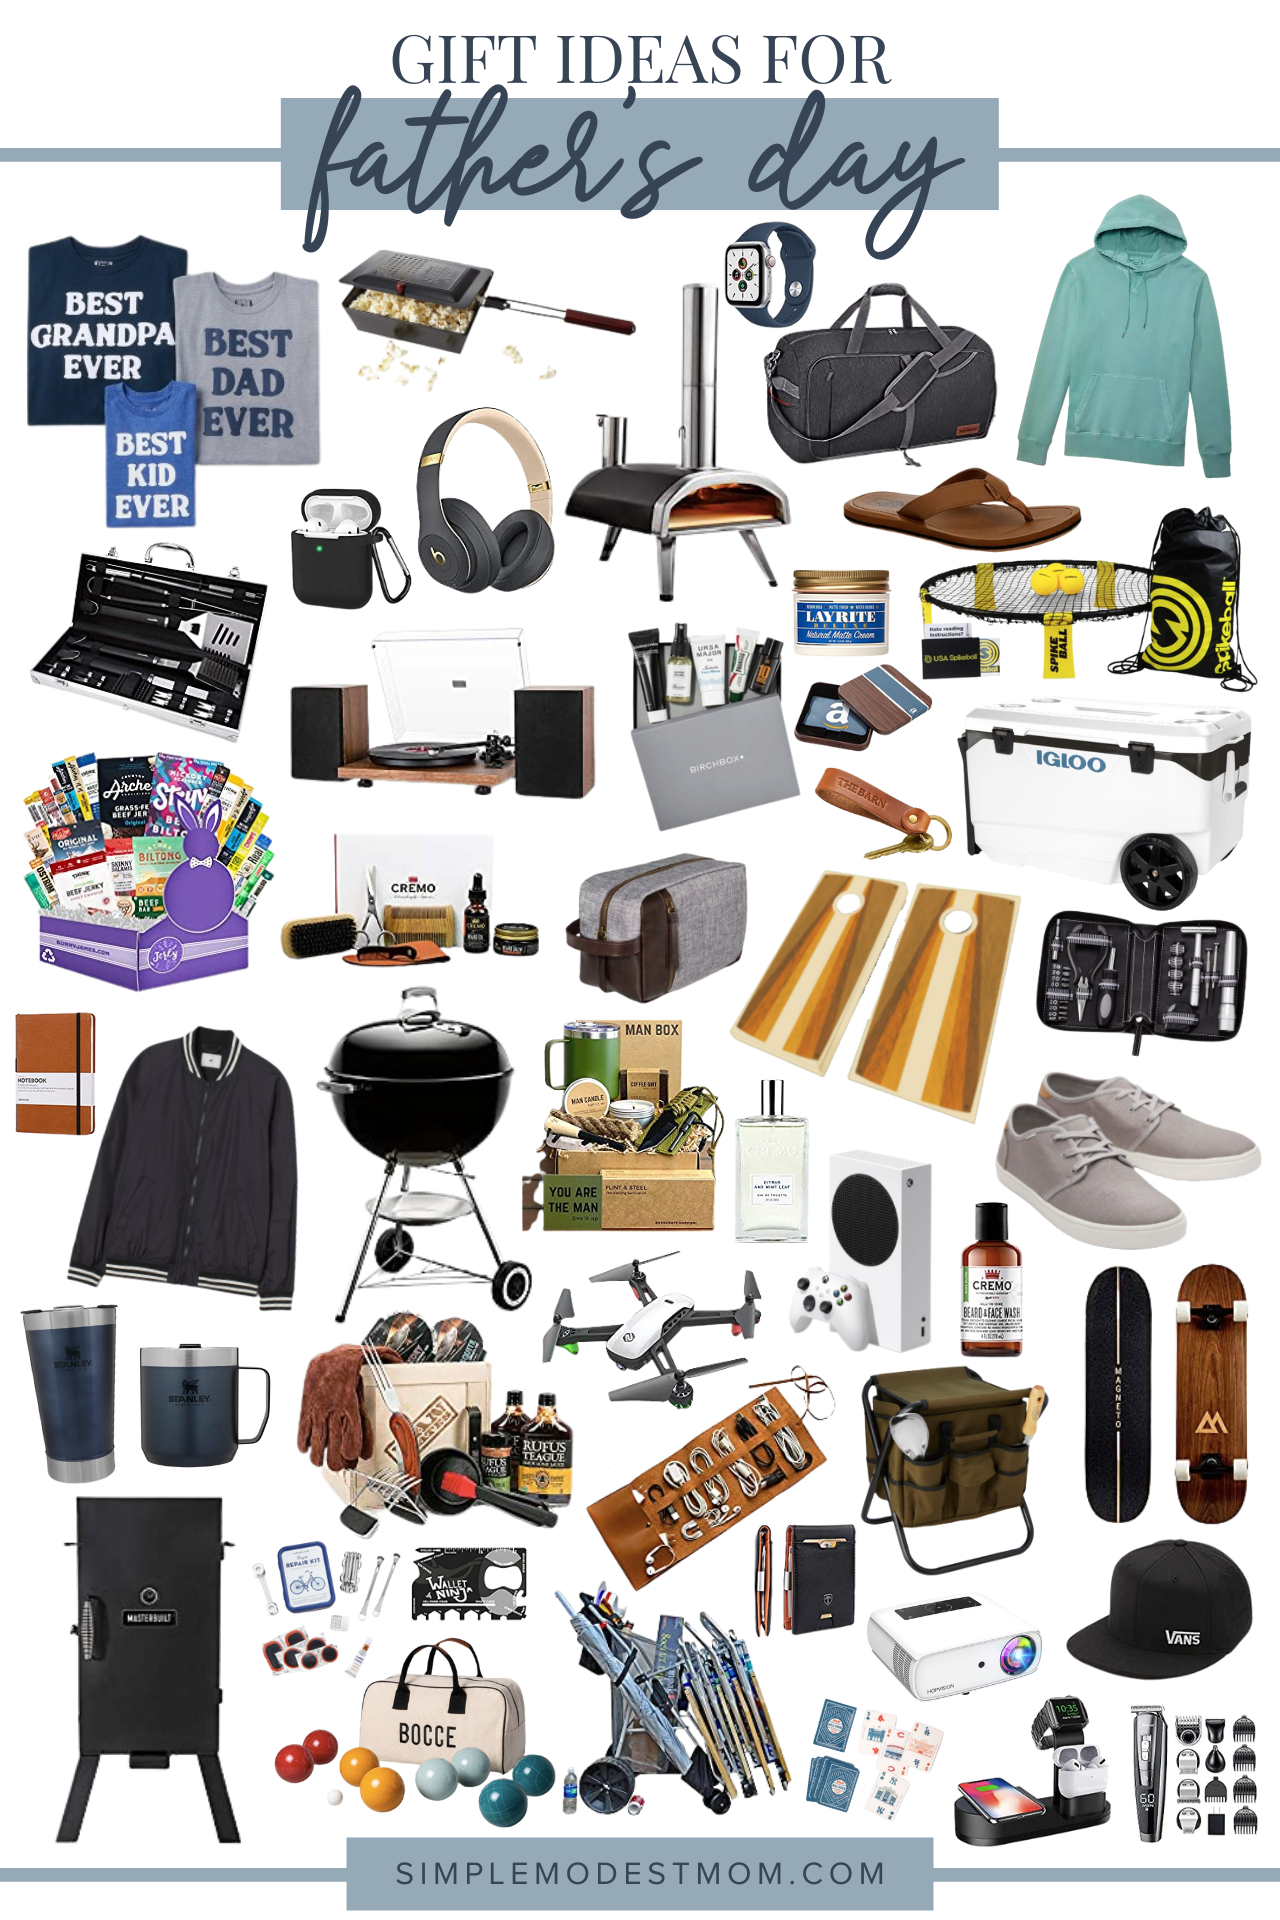 14 Useful (But Still Cool) Father's Day Gifts For Dad - The Mom Edit